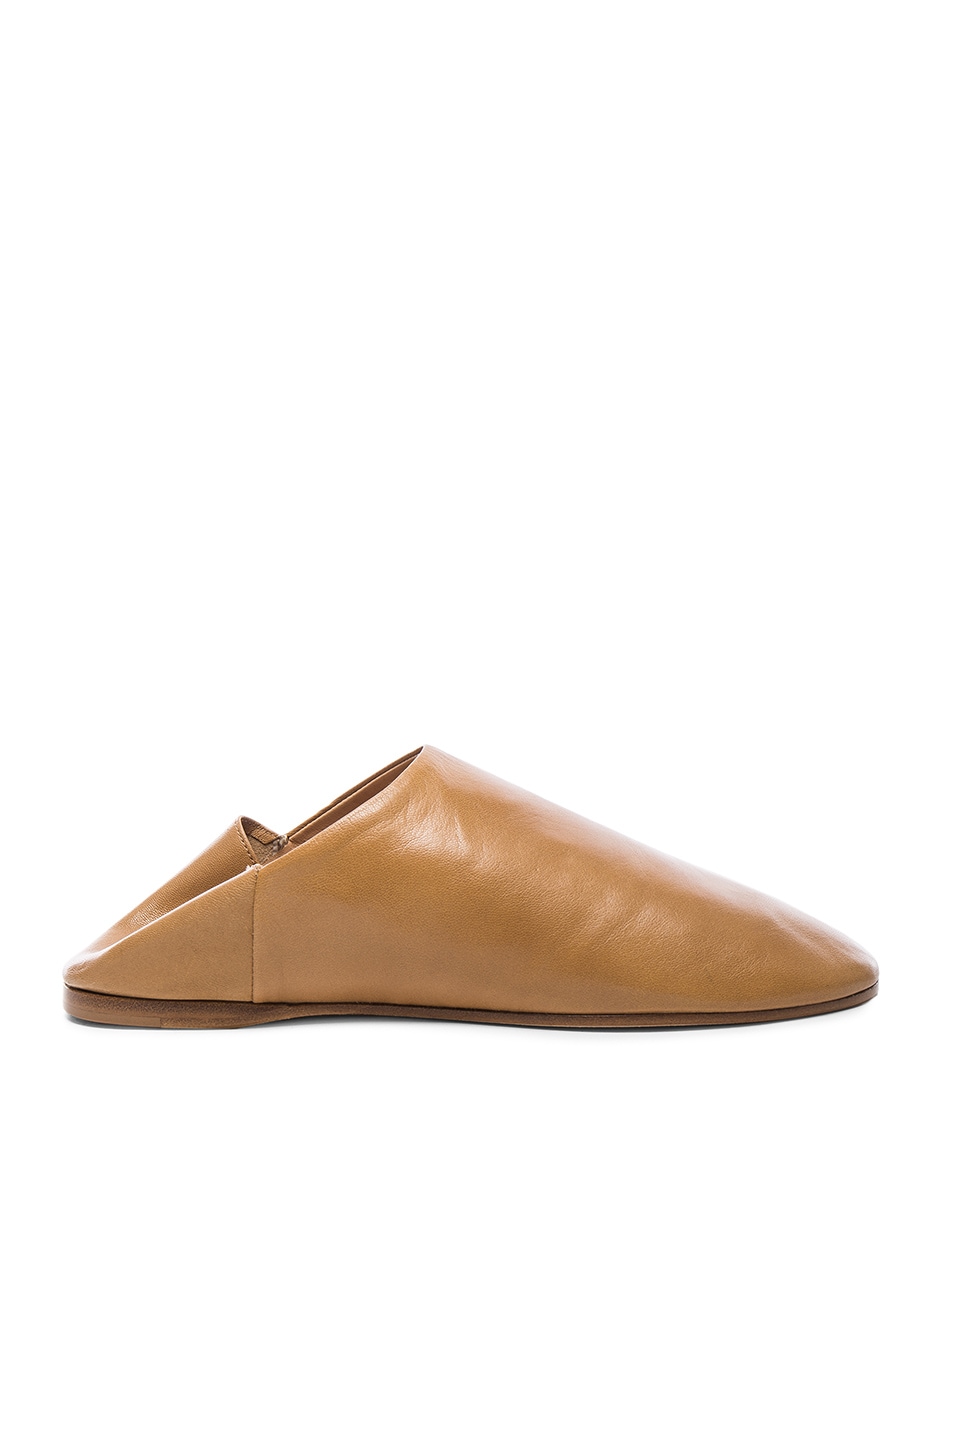 Image 1 of Acne Studios Leather Agata Babouche Slippers in Camel